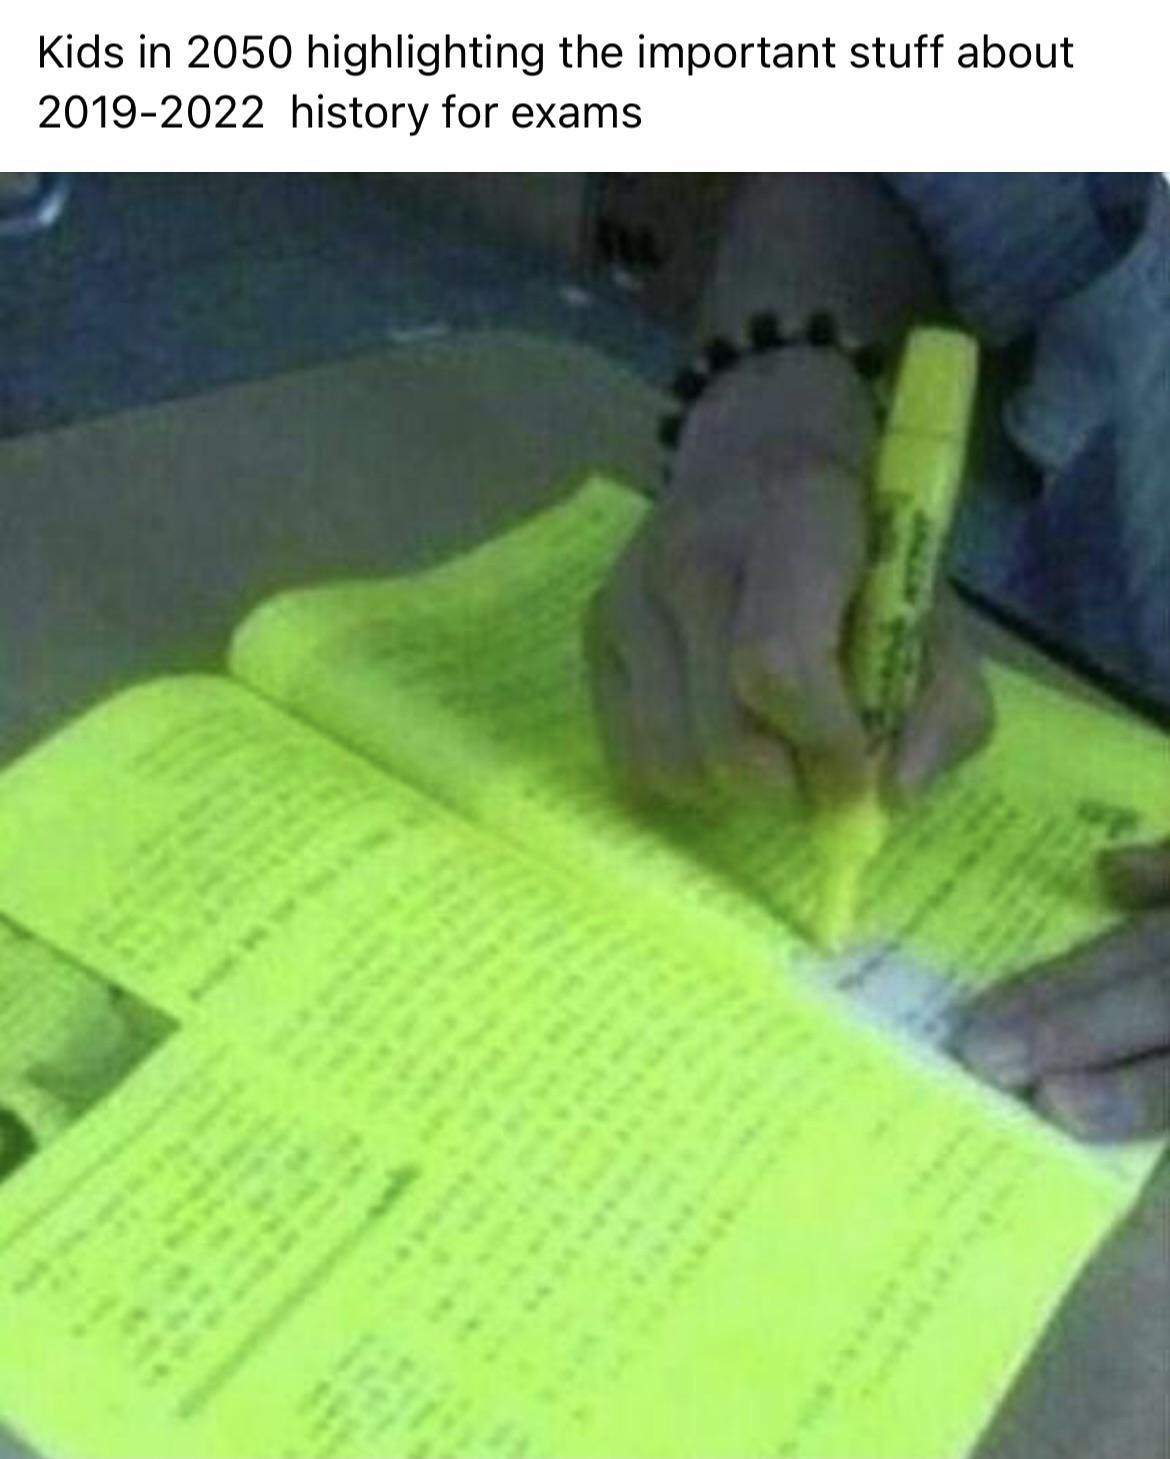 dank memes - funny memes - underline what is important - Kids in 2050 highlighting the important stuff about 20192022 history for exams